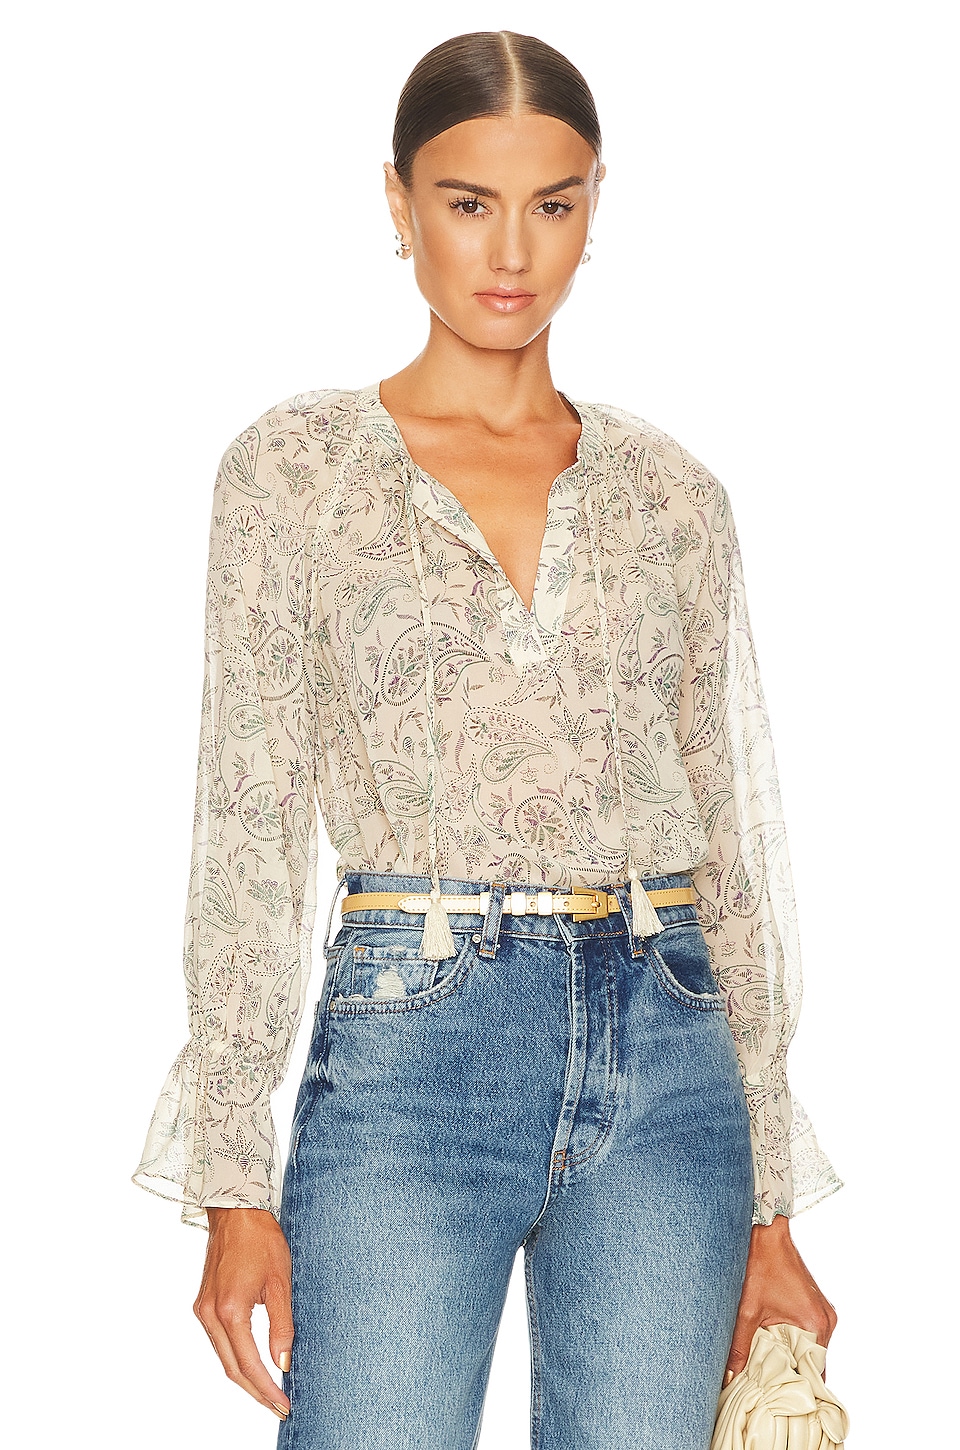 Bardot Valentina Corset Top in Lily Floral